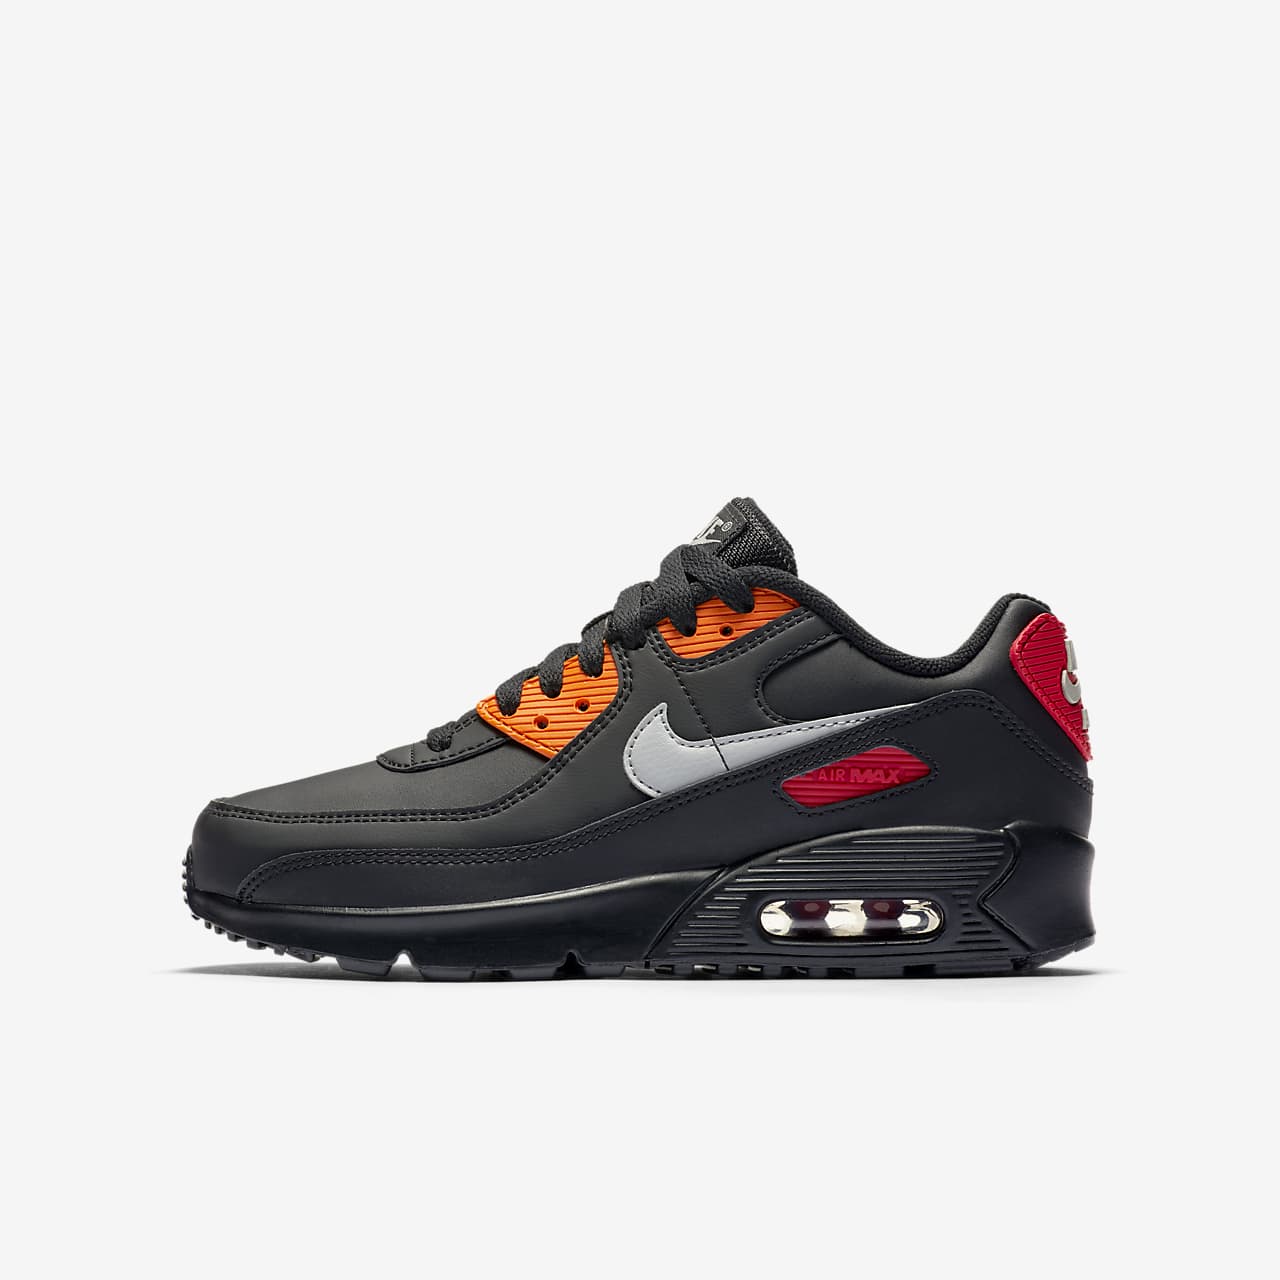 Nike Air Max 90 Black And Orange Outlet Online, UP TO 70% OFF